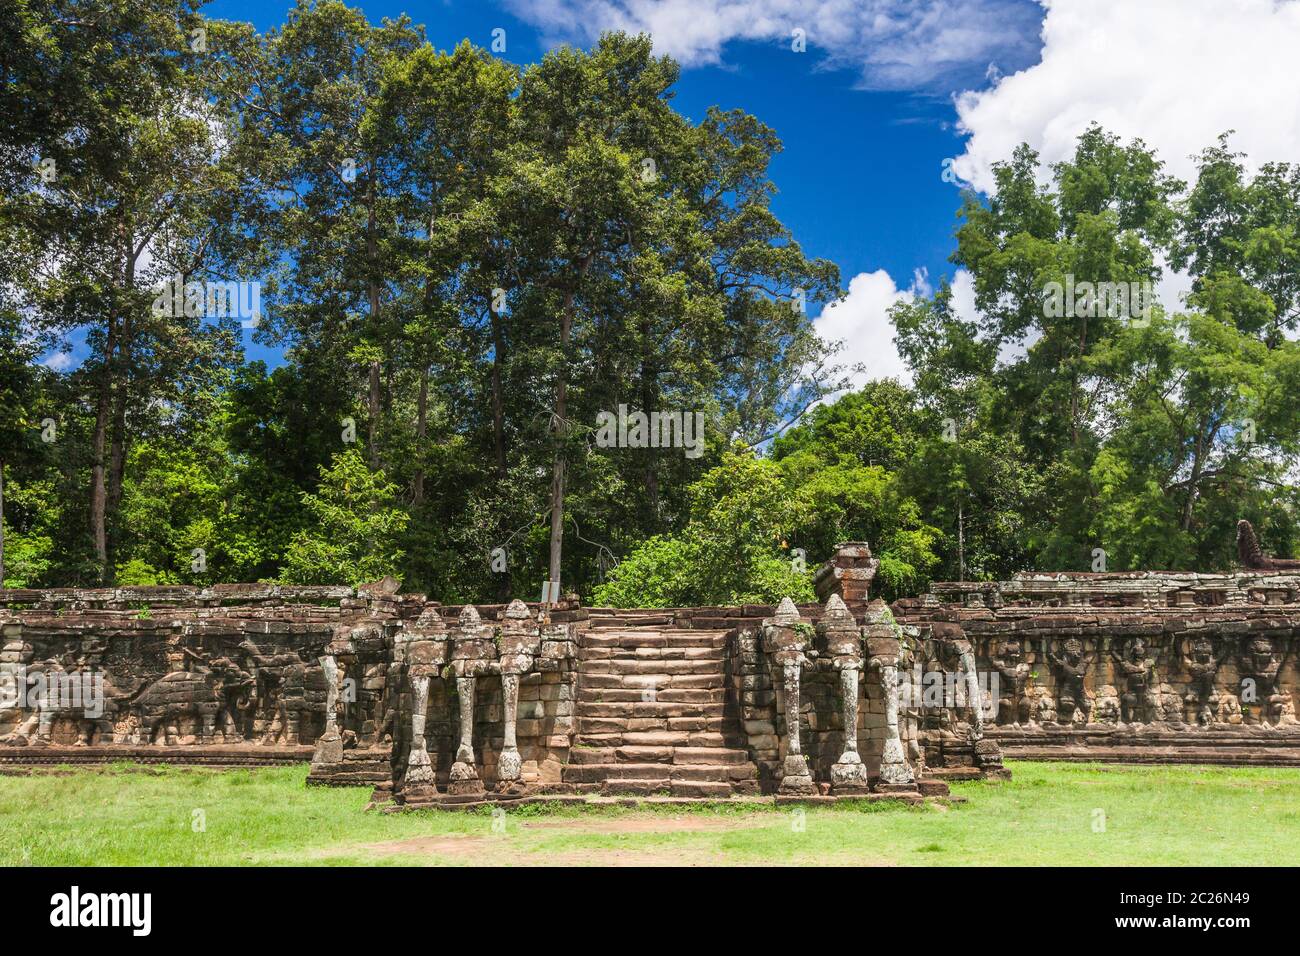 Angkor Thom, Terrace of the Elephants, Ancient capital of Khmer Empire, Siem Reap, Cambodia, Southeast Asia, Asia Stock Photo